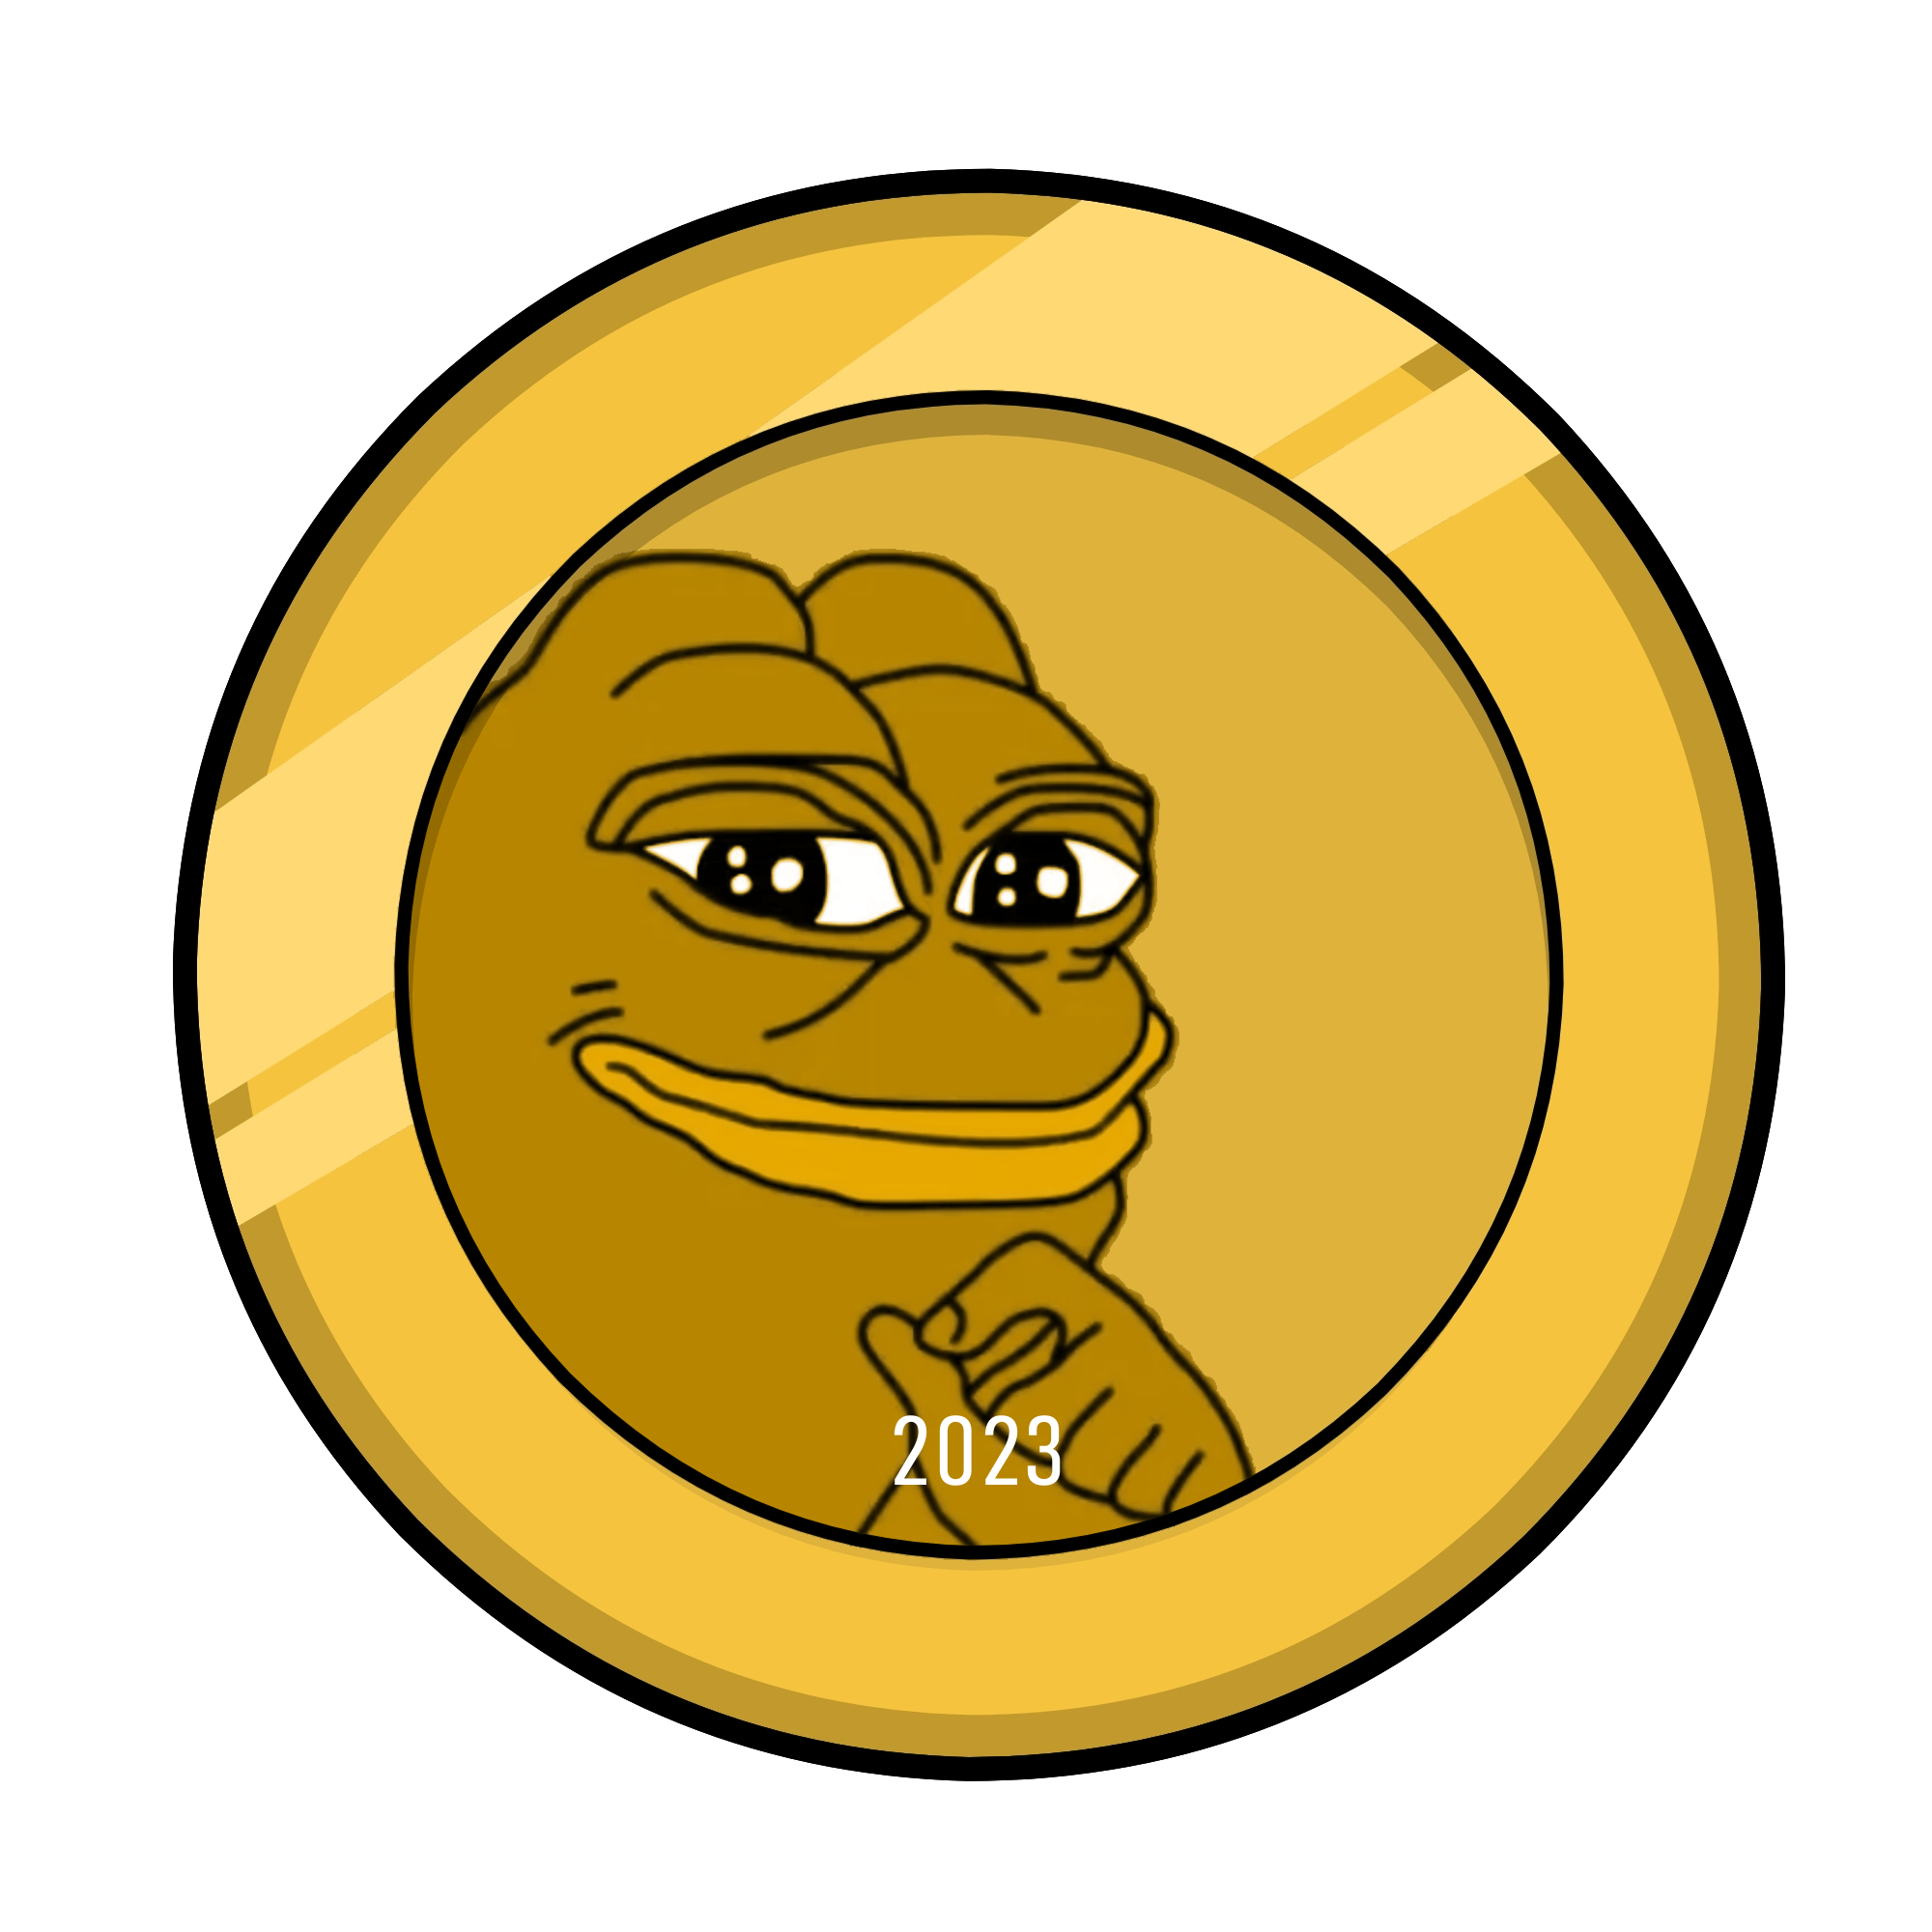 Pepe Token, a Meme Cryptocurrency Ⓒ 2023 – Crypto Coin Opps